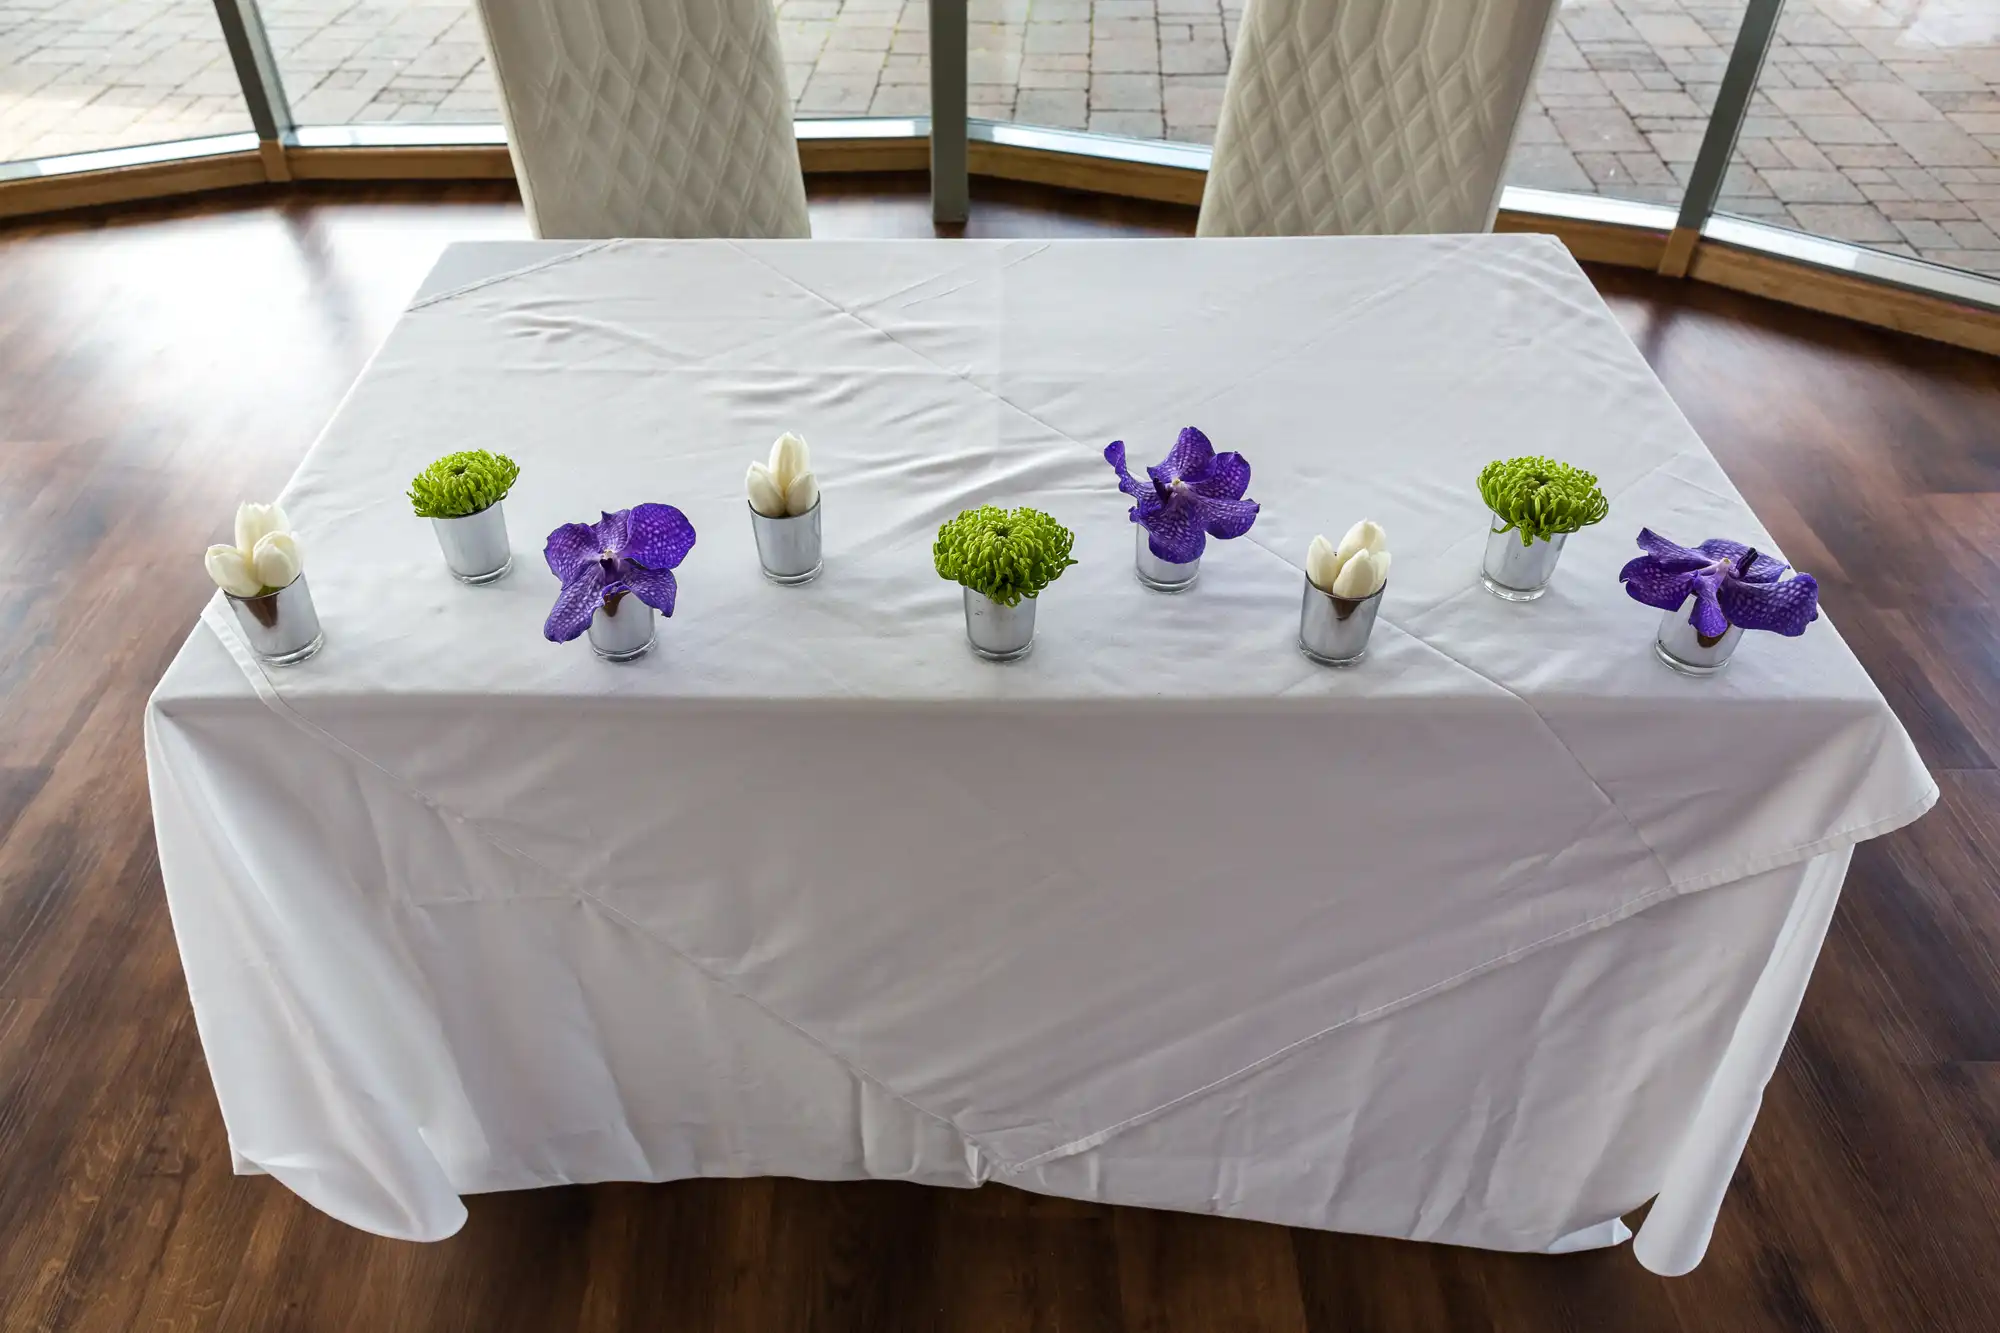 A rectangular table covered with a white tablecloth, decorated with symmetrically placed purple orchids and green plants in white pots, in a room with large glass windows.